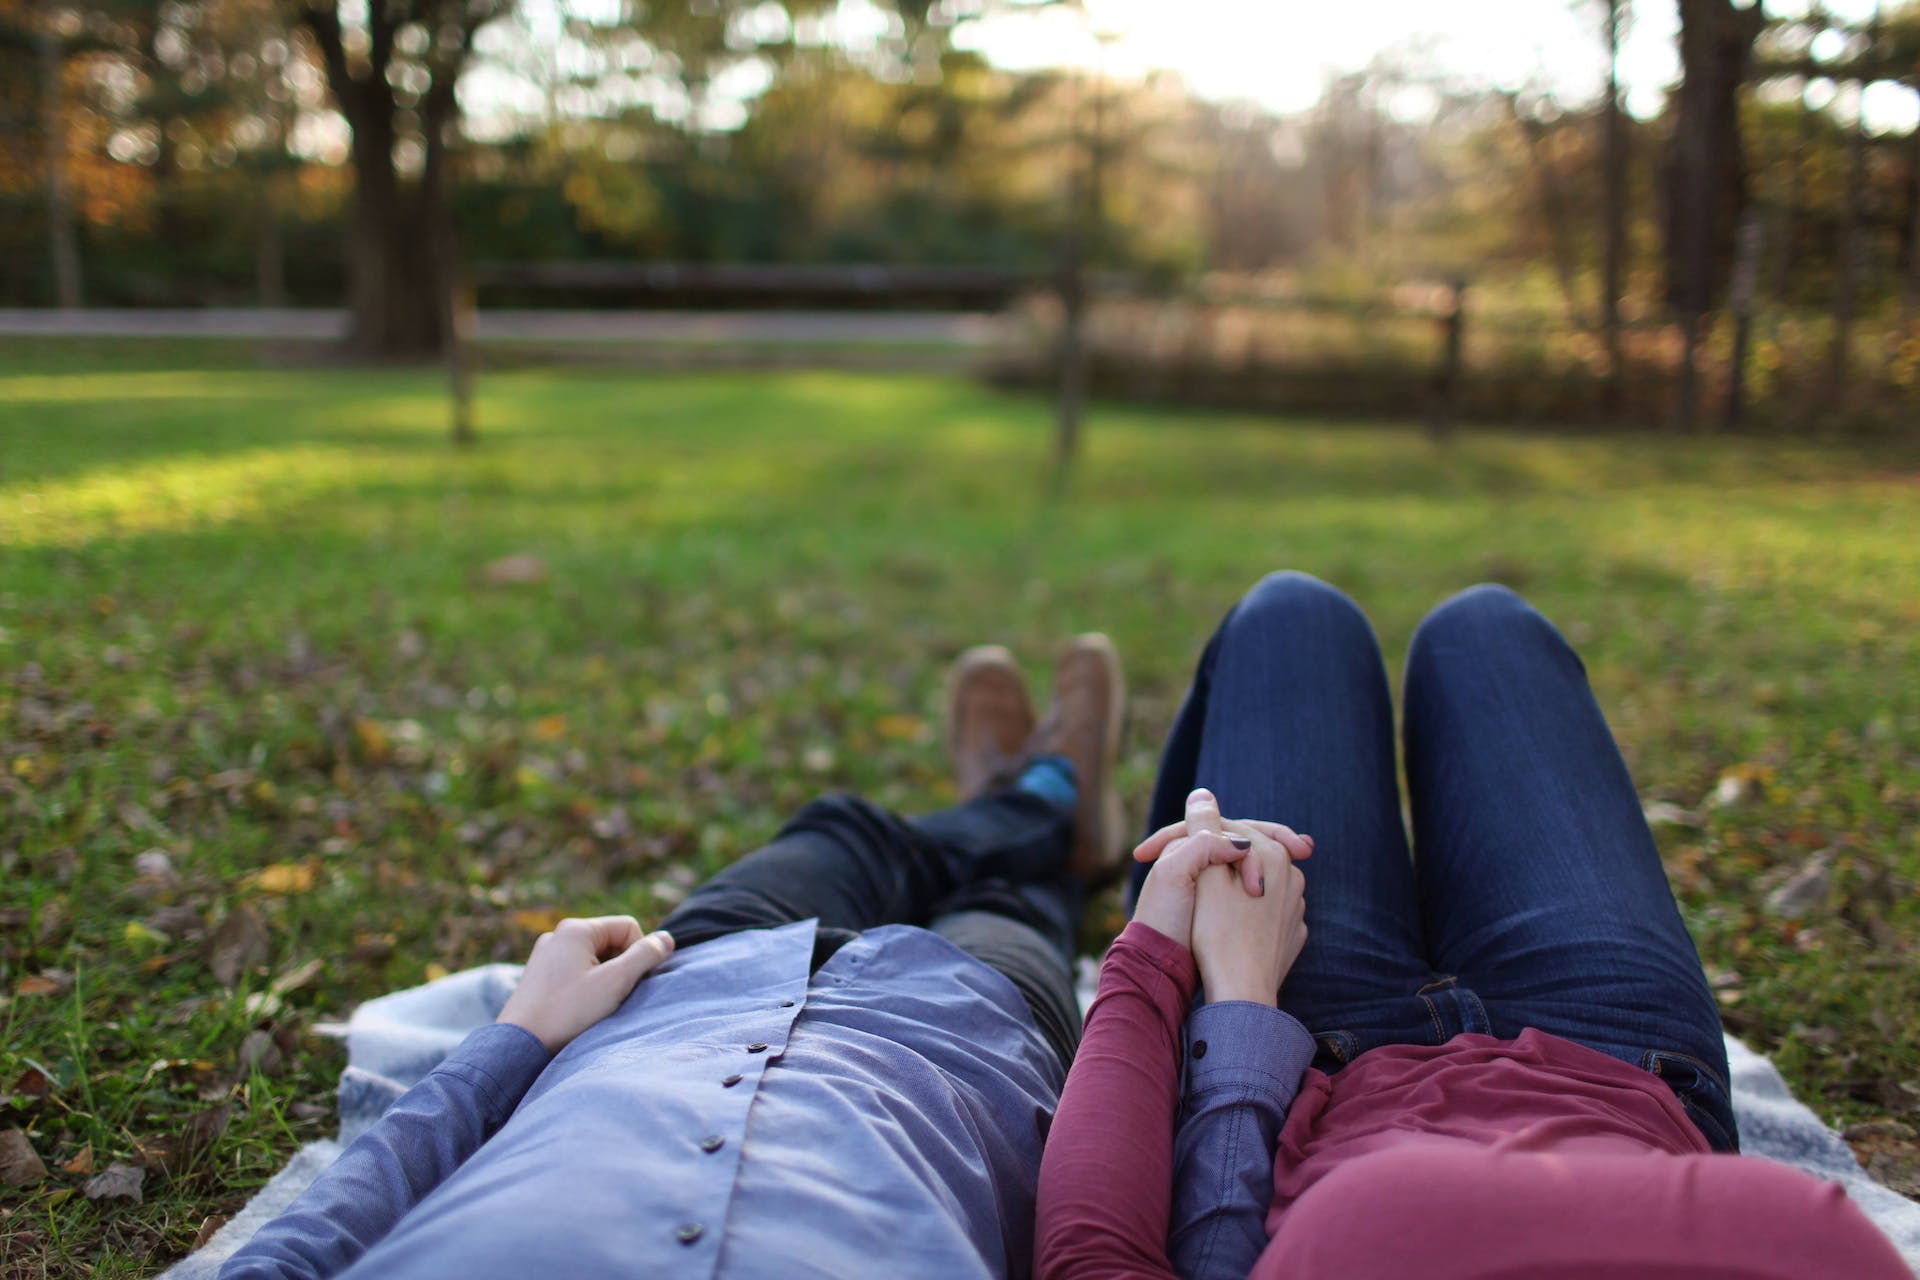 Young couple laying on grass | Source: Pexels